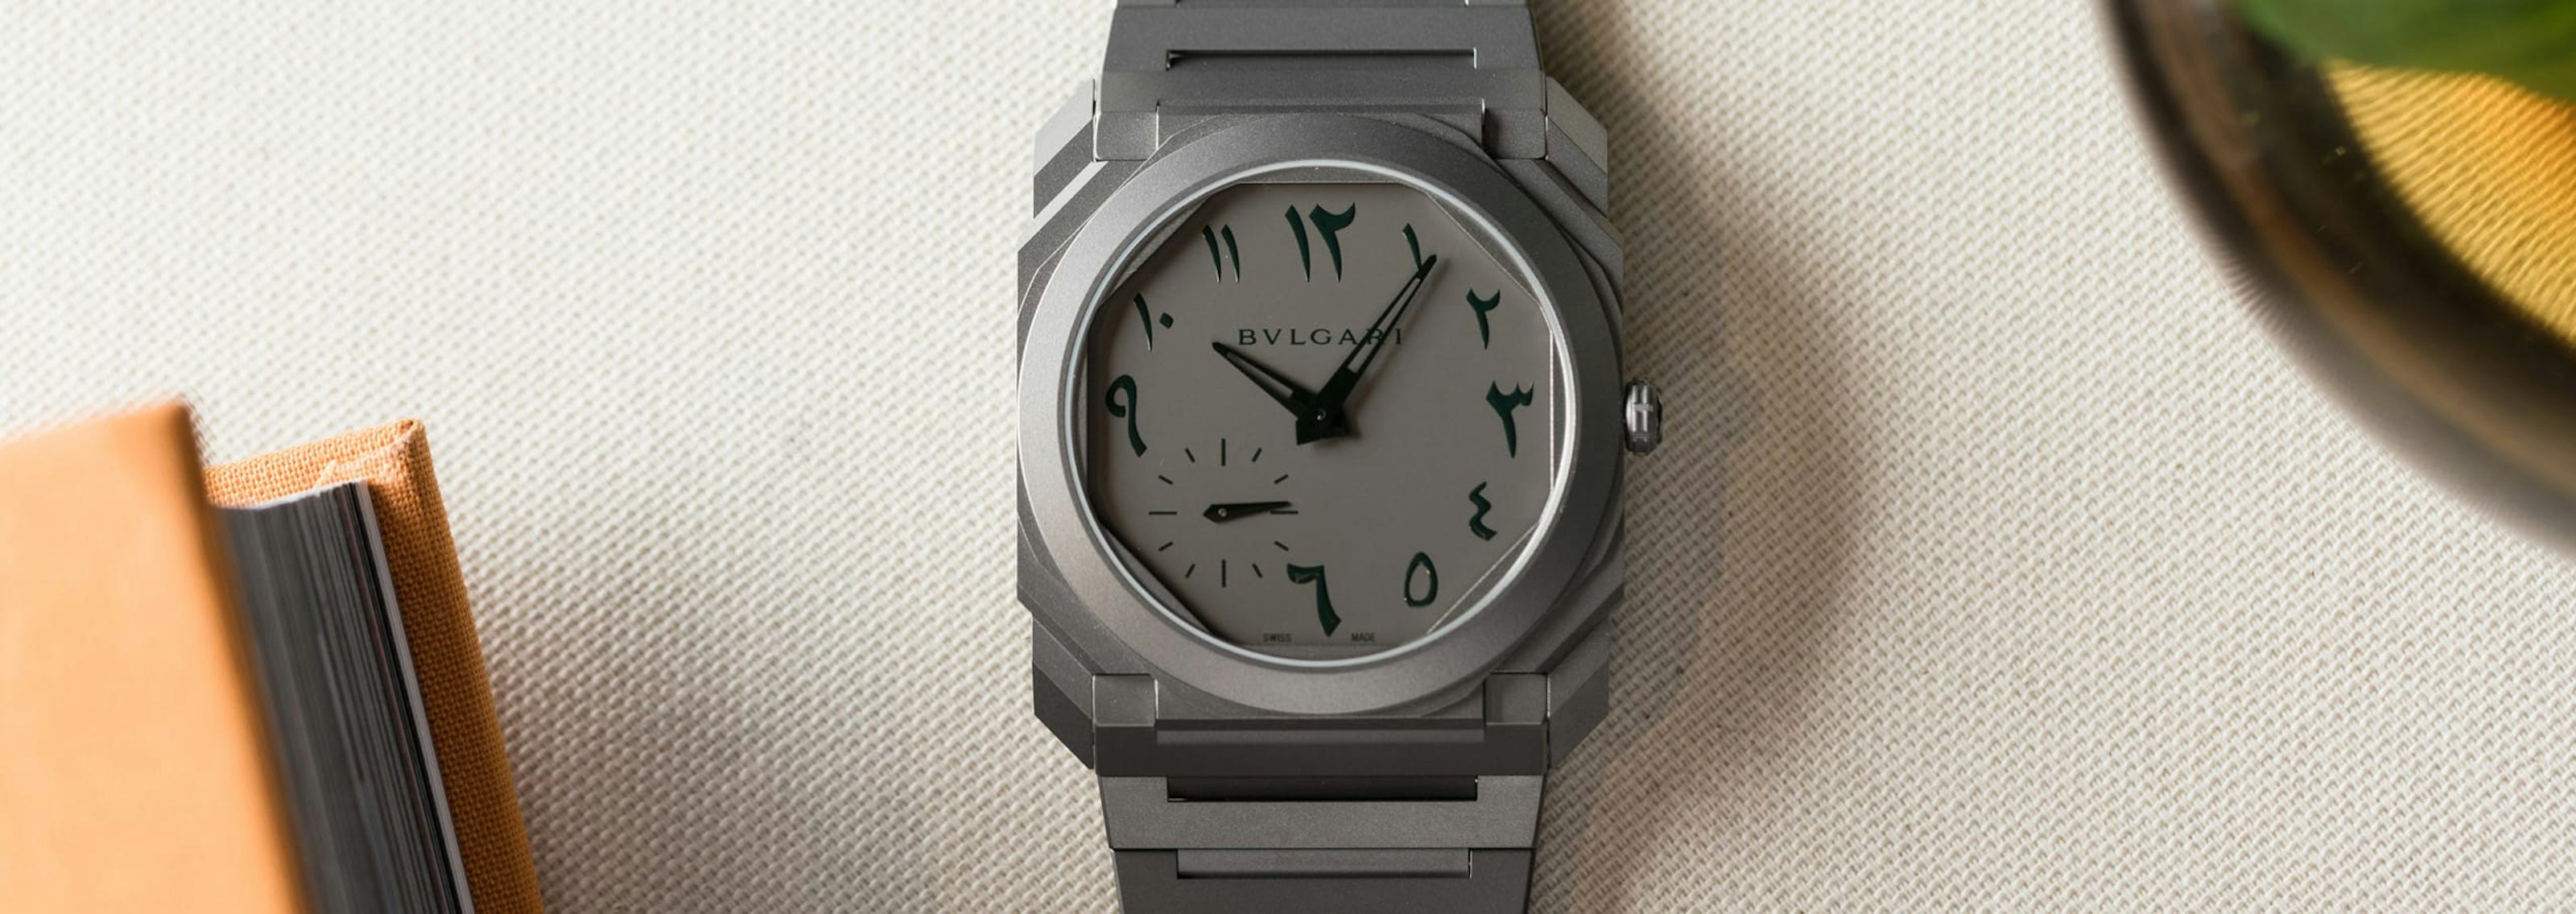 In Focus: Bulgari Octo Finissimo Middle East Edition